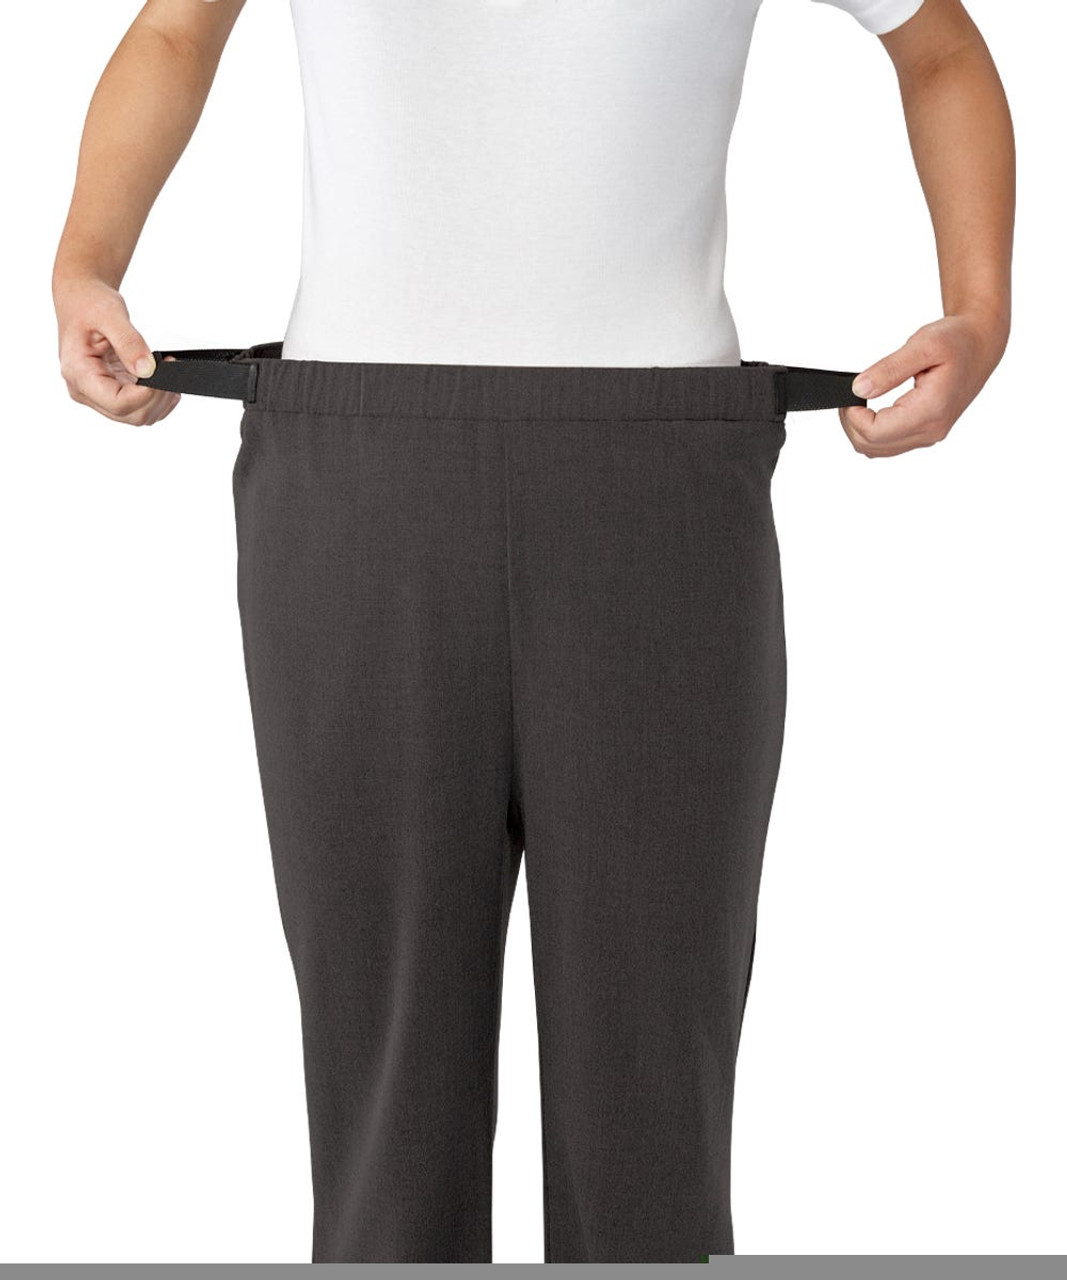 Silverts SV41010 Stretchy Wheelchair Pants for Women Charcoal, Size=2XL, SV41010-SV7-2XL